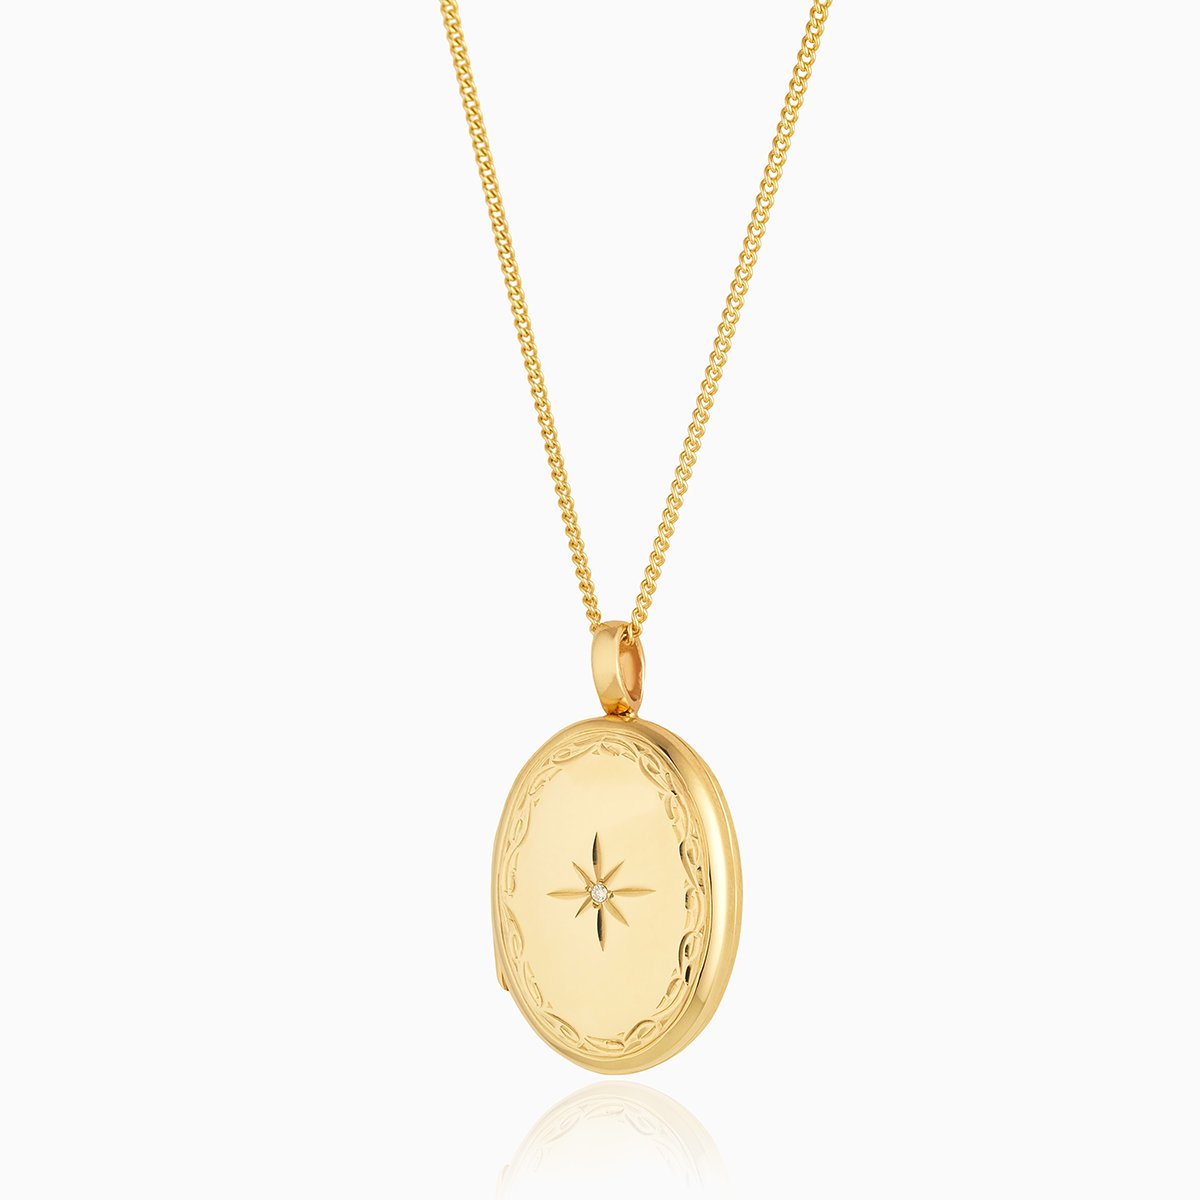 Large 9 ct gold oval locket with an engraved border and diamond on a 9 ct gold curb chain.